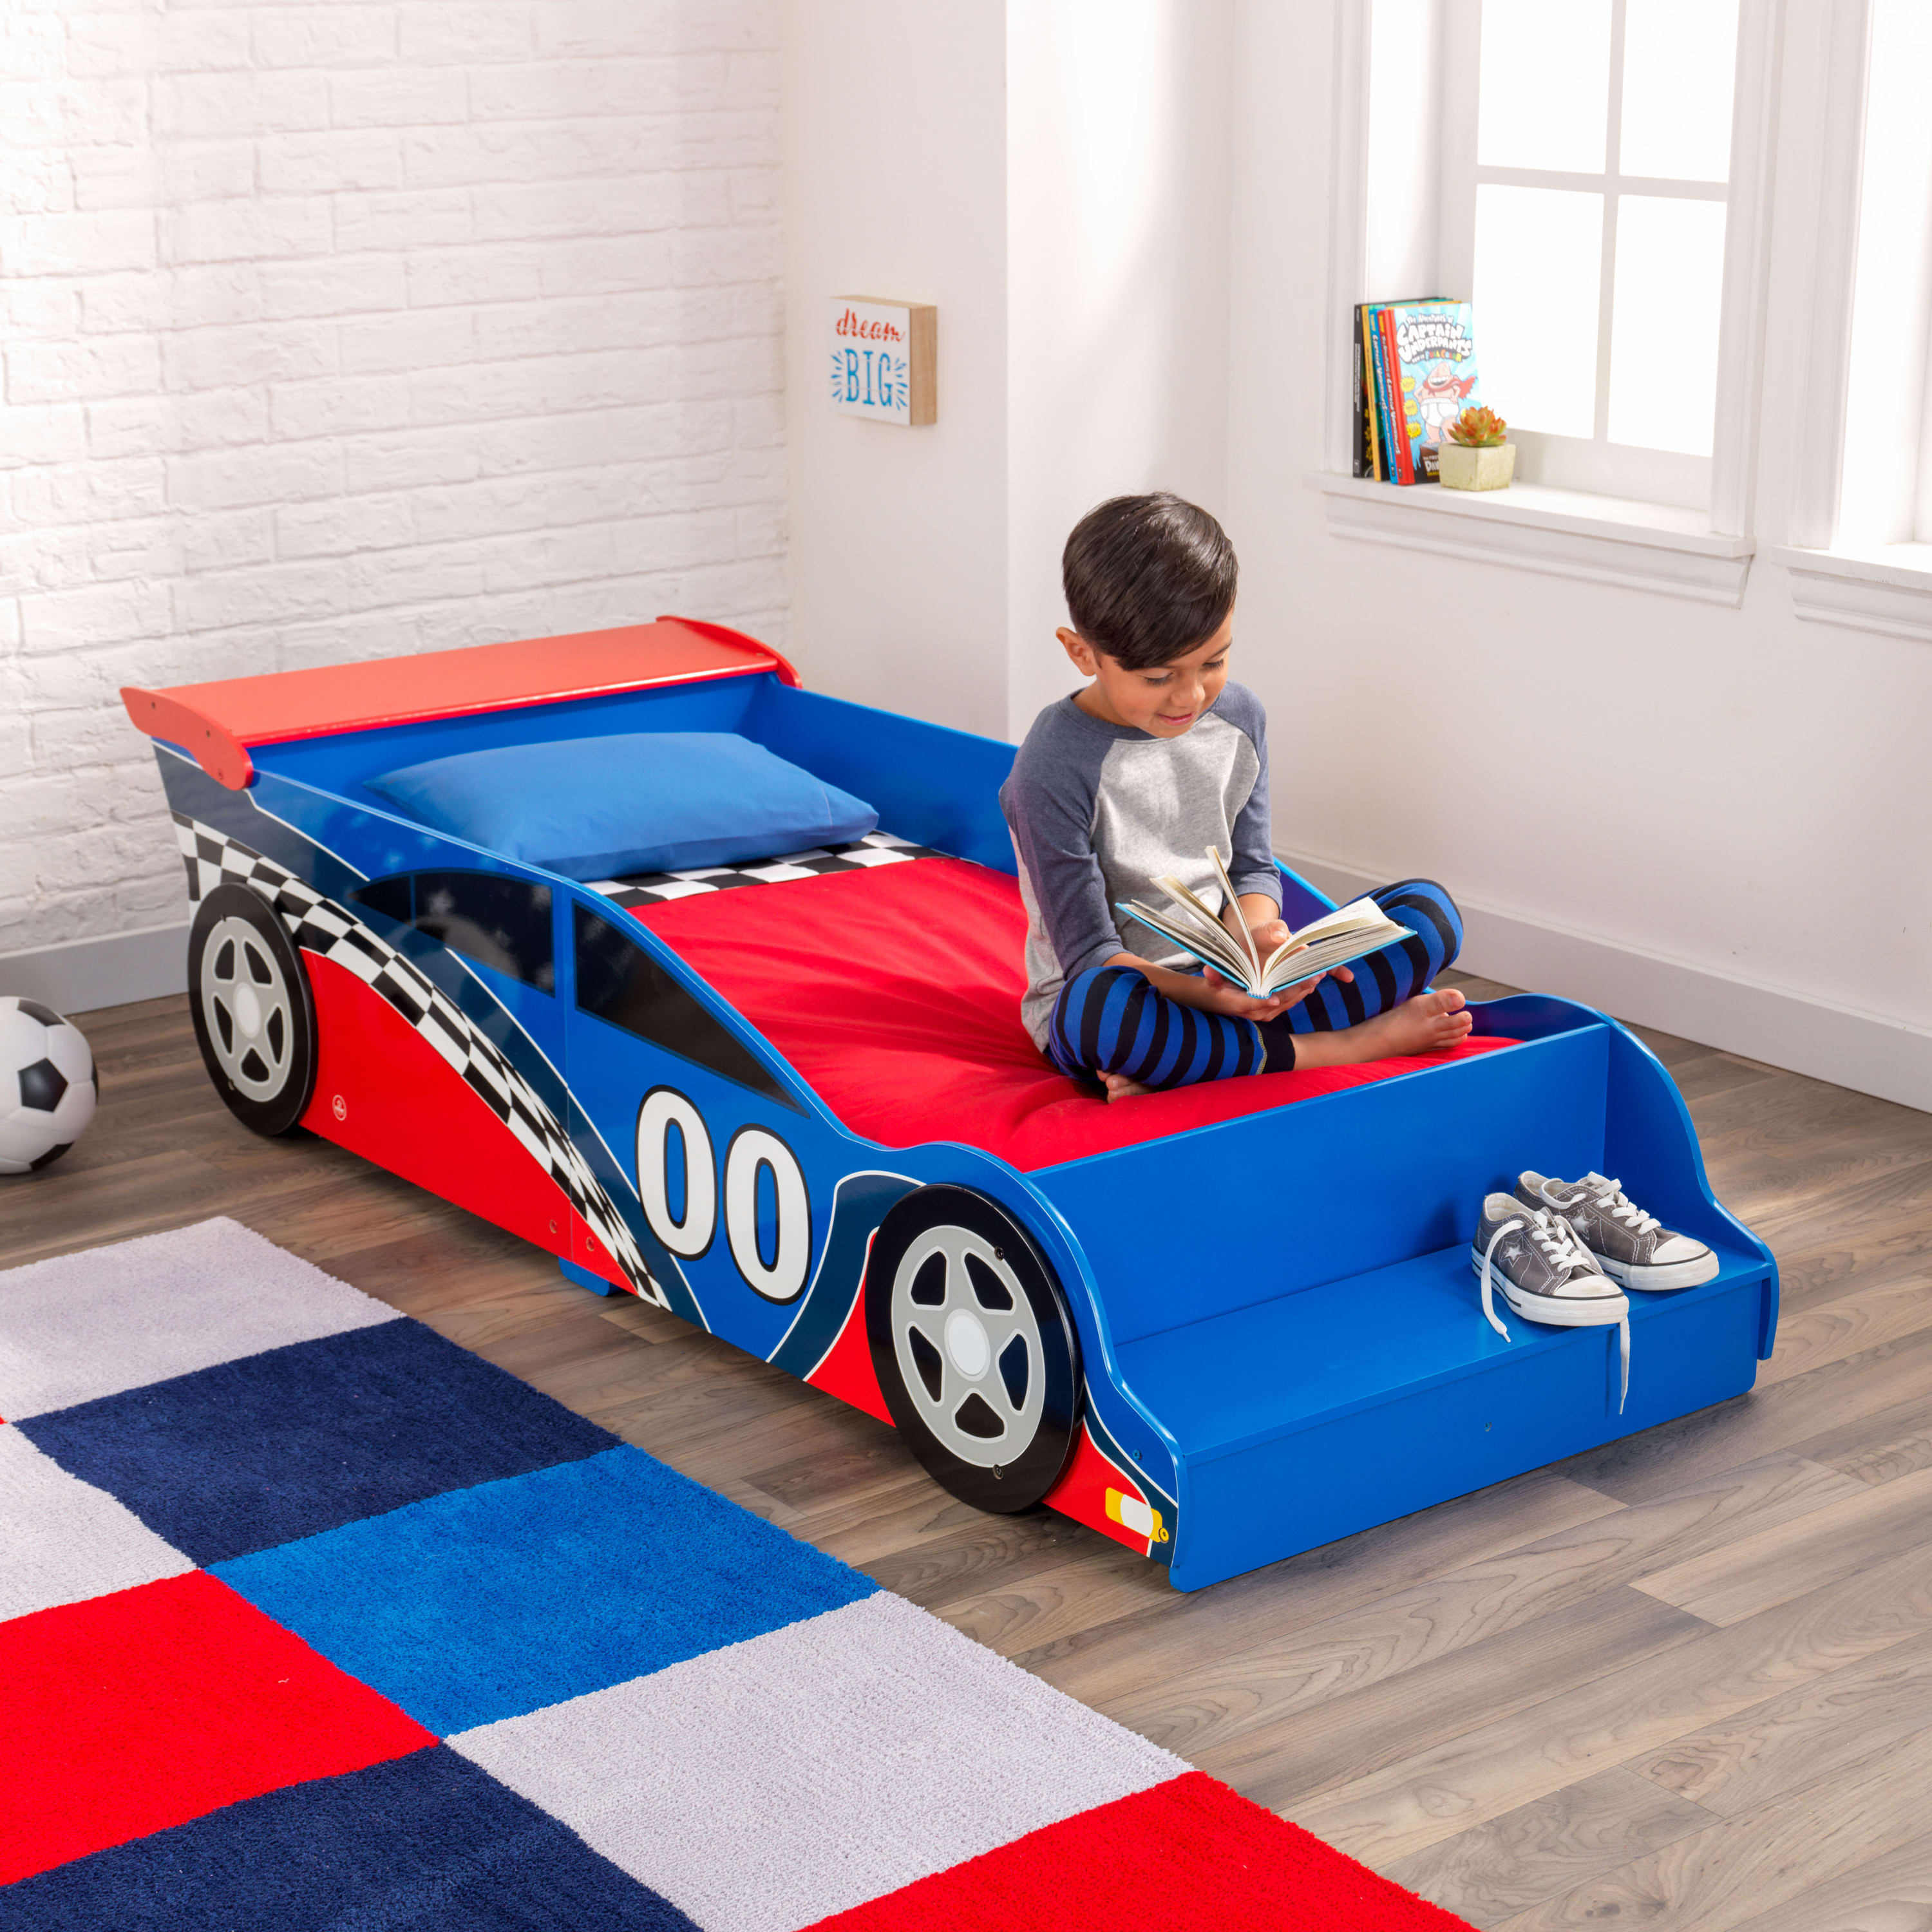 KidKraft Wooden Racecar Toddler Bed with Built-In Bench and Bed Rails - Red and Blue - image 3 of 8